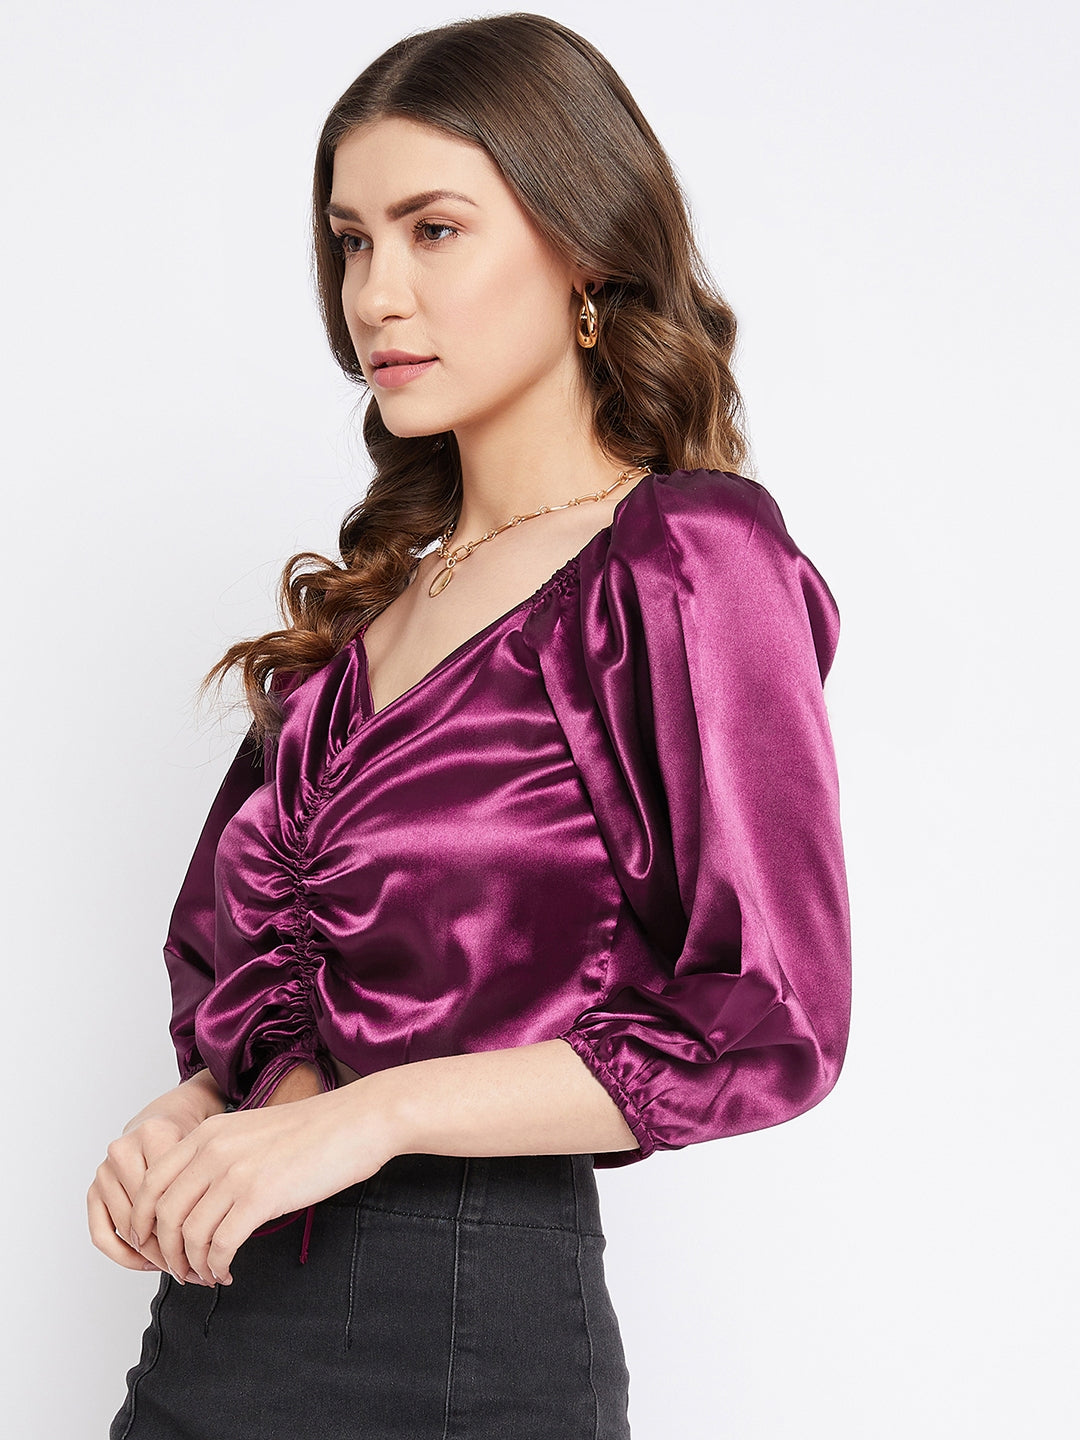 Purple Colour Solid Sateen Drawstring Ruchied Top